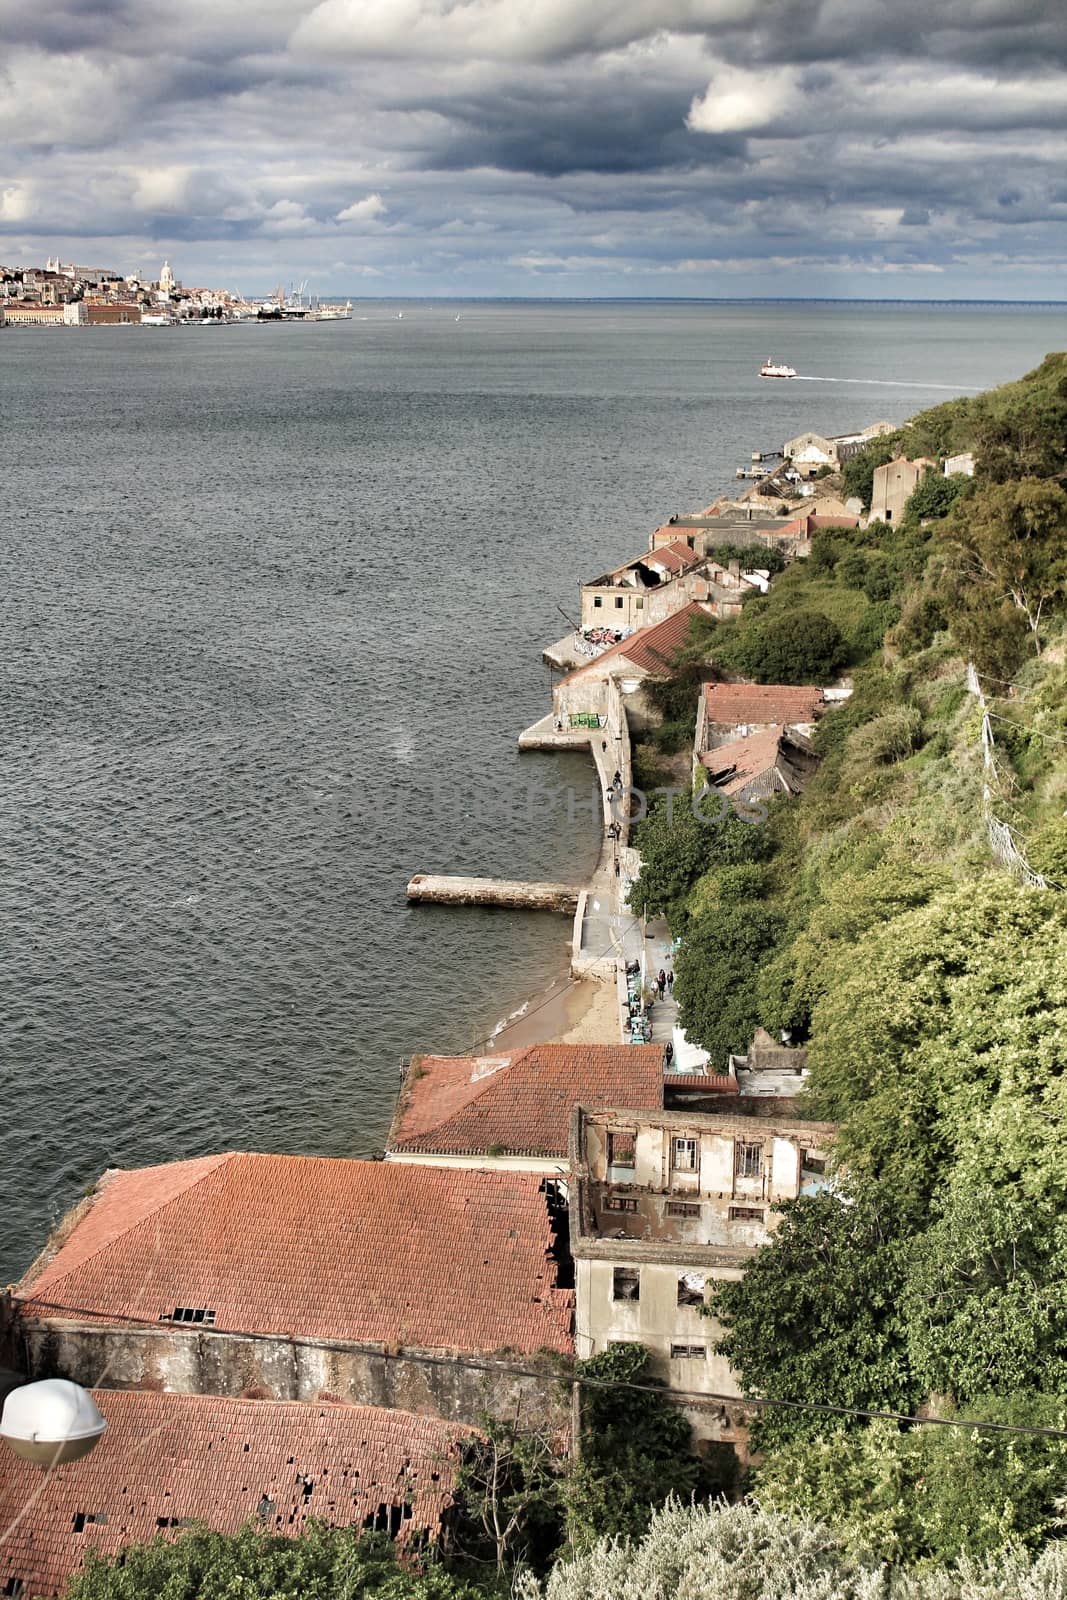 Panoramic of the docks of Cacilhas village and Tagus river on a cloudy day